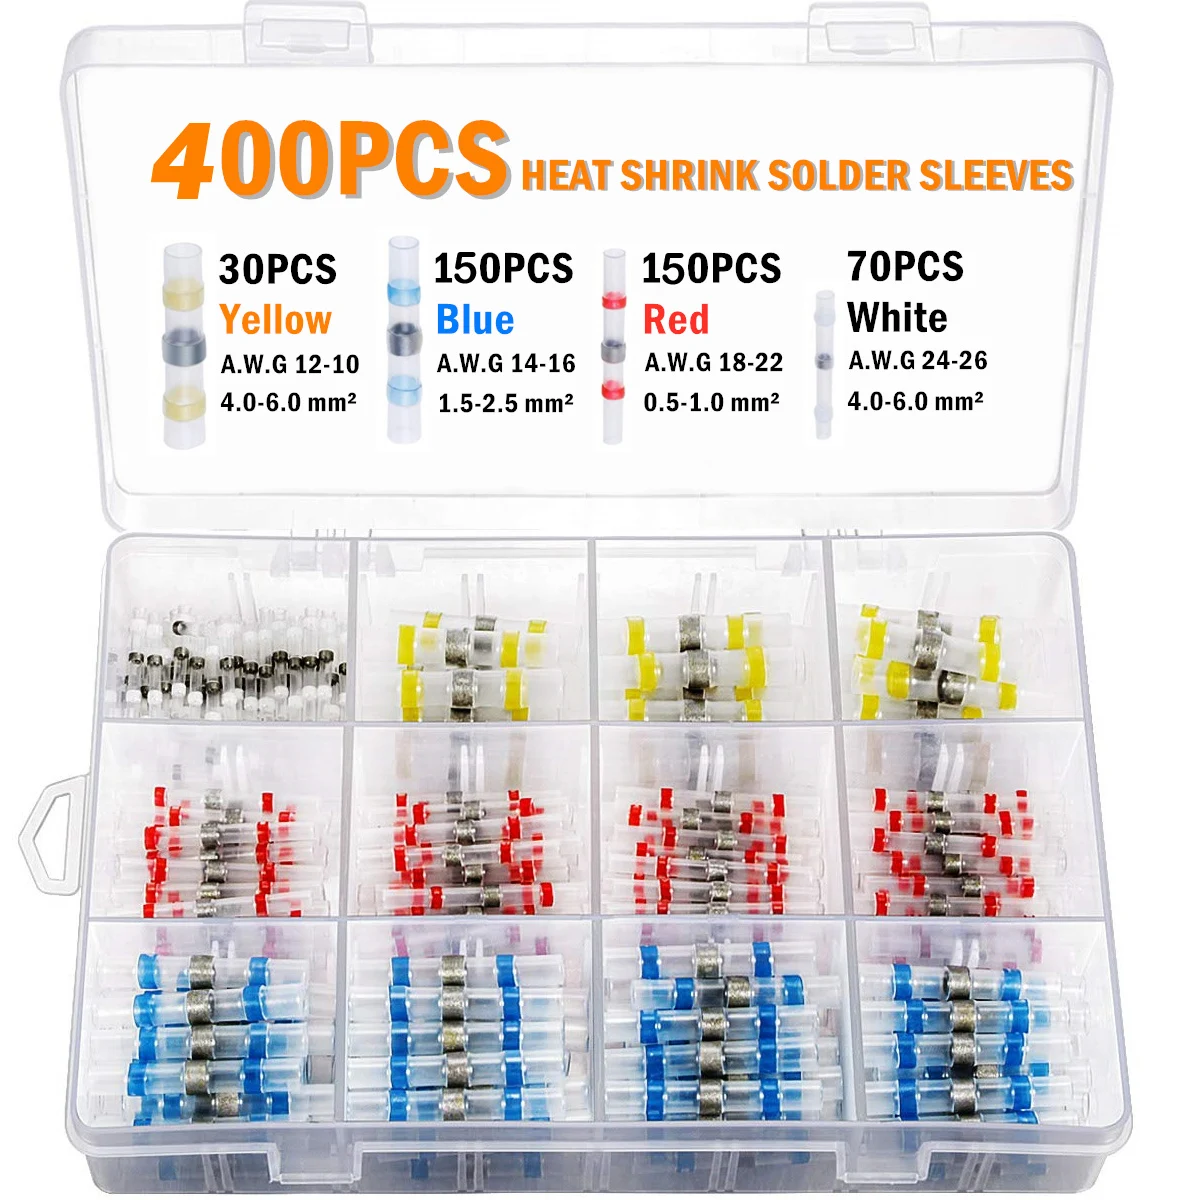 

400Pcs Waterproof Insulated Solder Seal Sleeve Wire Connectors Heat Shrink Wire Butt Connector Terminals Kit Assortment